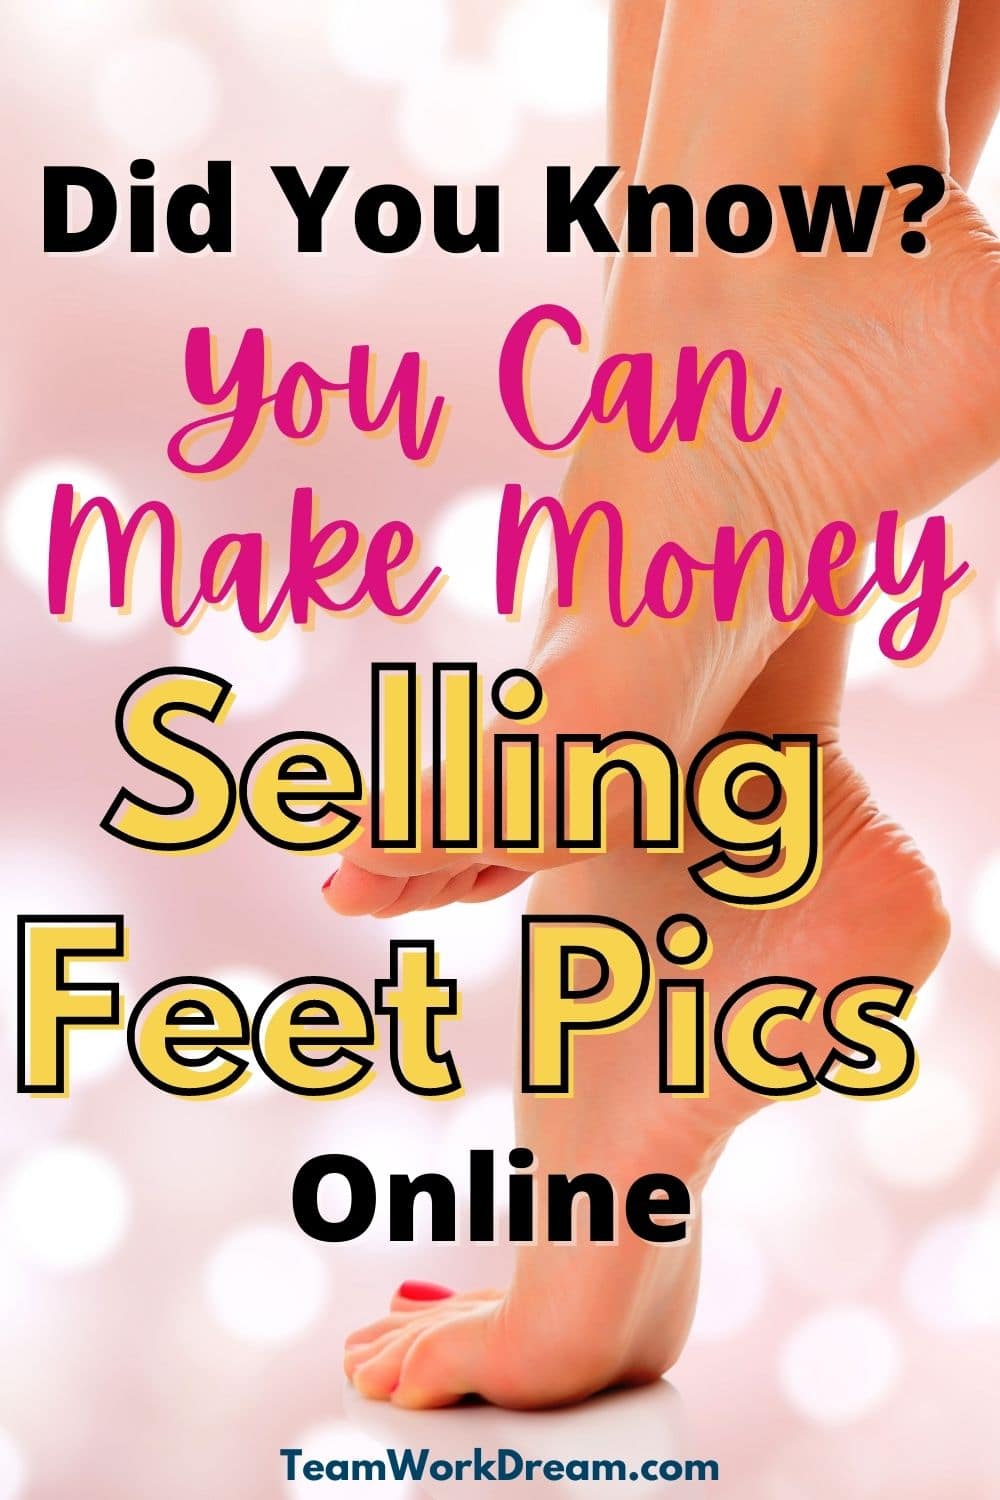 Can I Sell Feet Pictures And Make Money Teamwork Dream